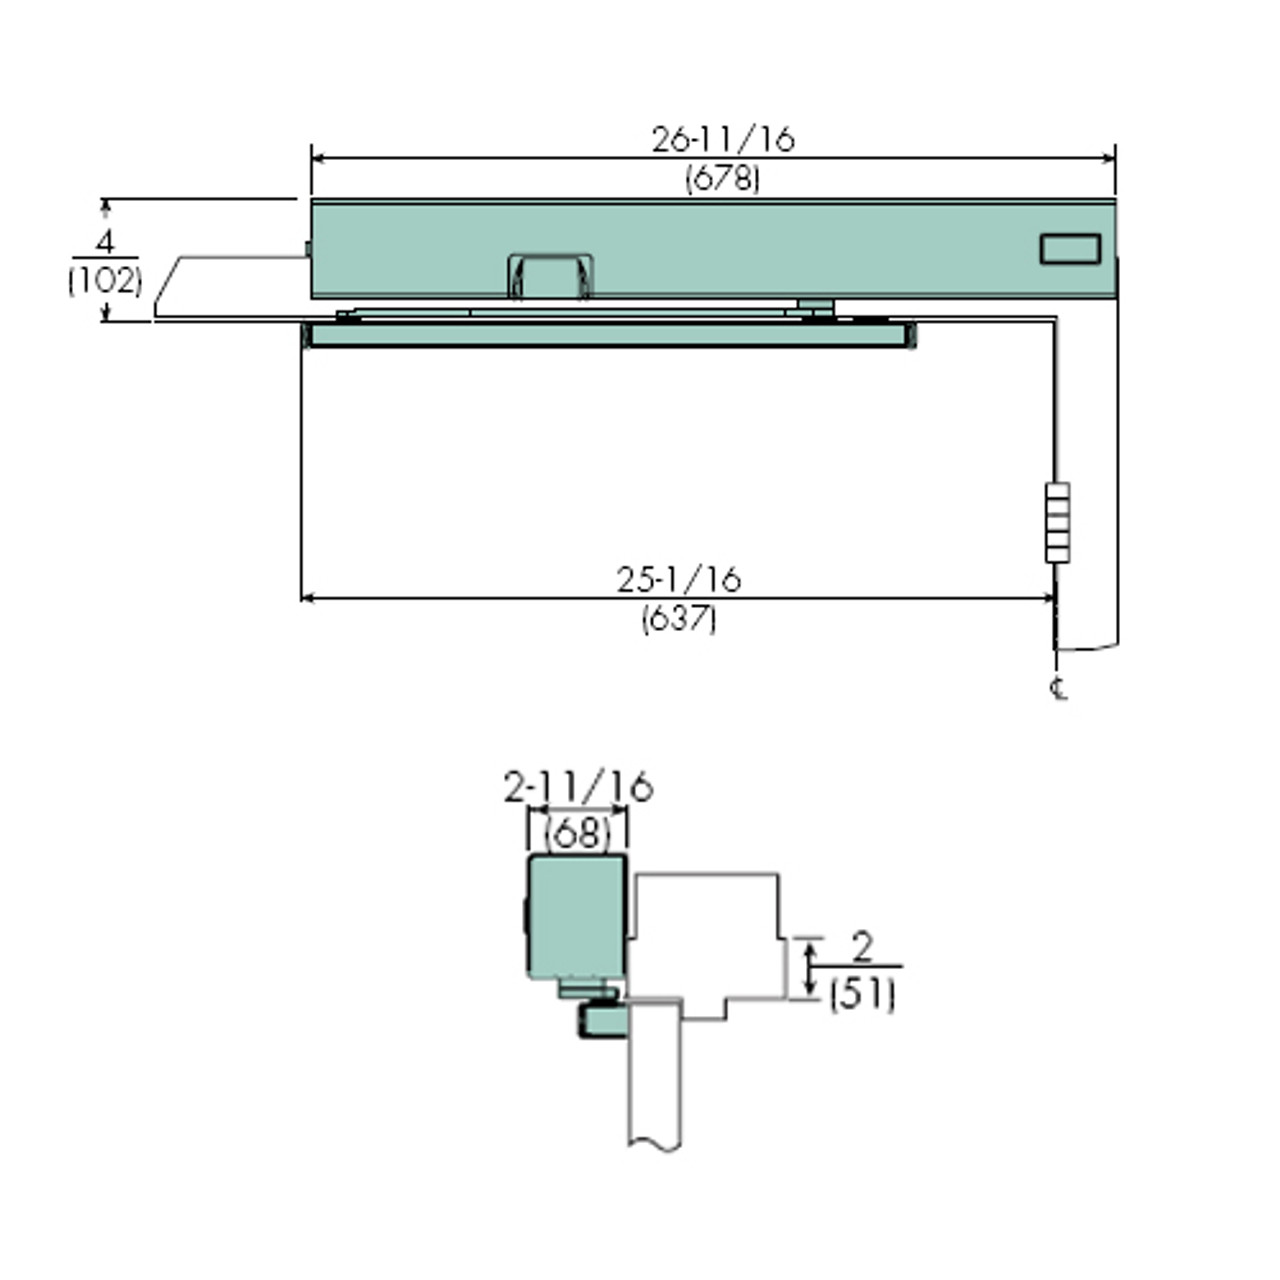 7155SZ-LH-120VAC-689 Norton 7100SZ Series Safe Zone Multi-Point Closer/Holder with Motion Sensor and Pull Side Double Egress Arm and Slide Track in Aluminum Finish